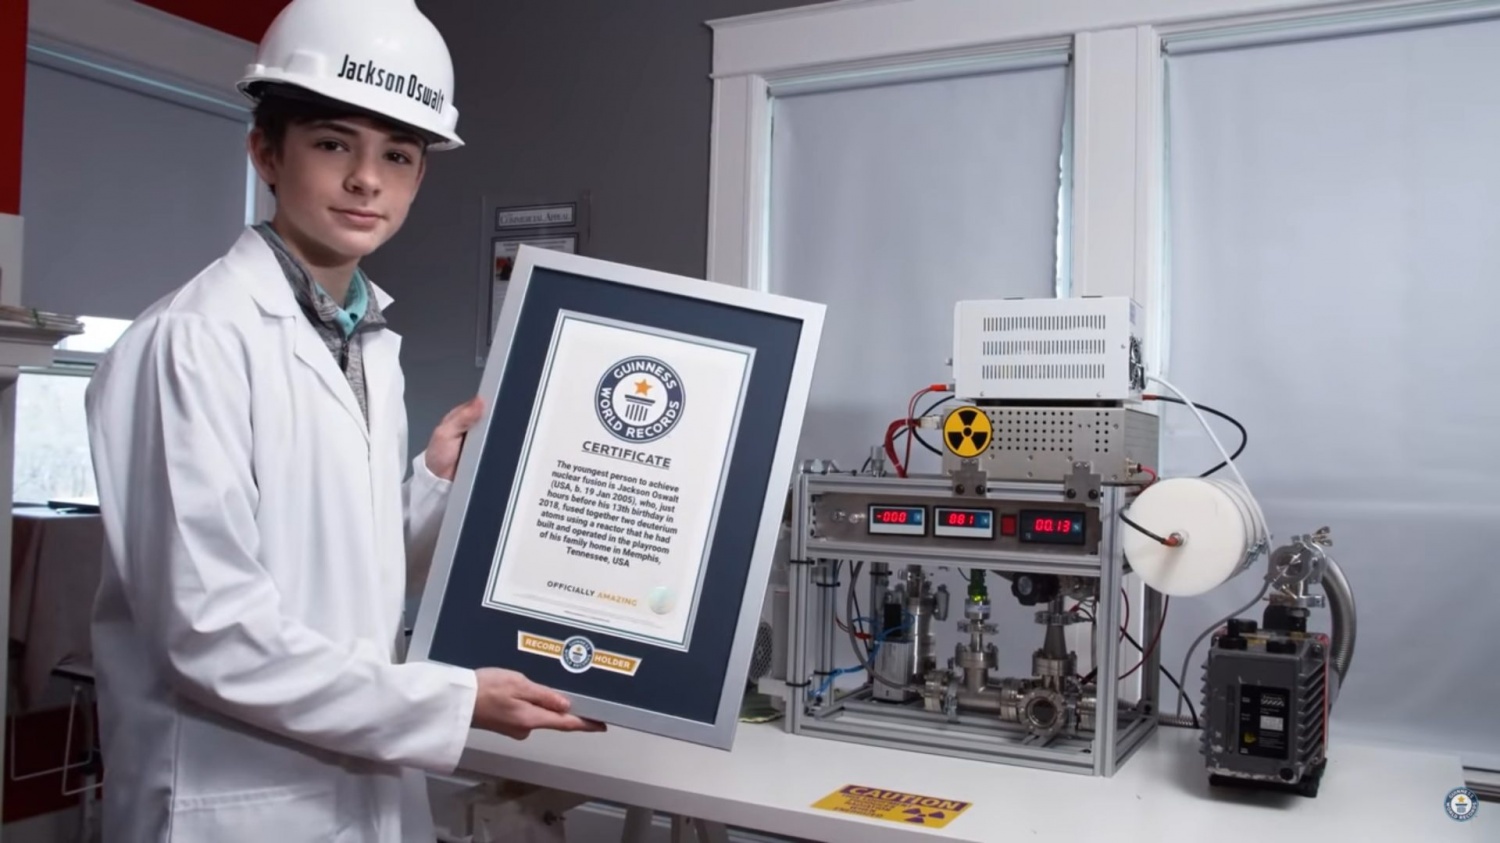 a-real-life-young-sheldon-12-year-old-boy-builds-nuclear-fusion-reactor.jpg